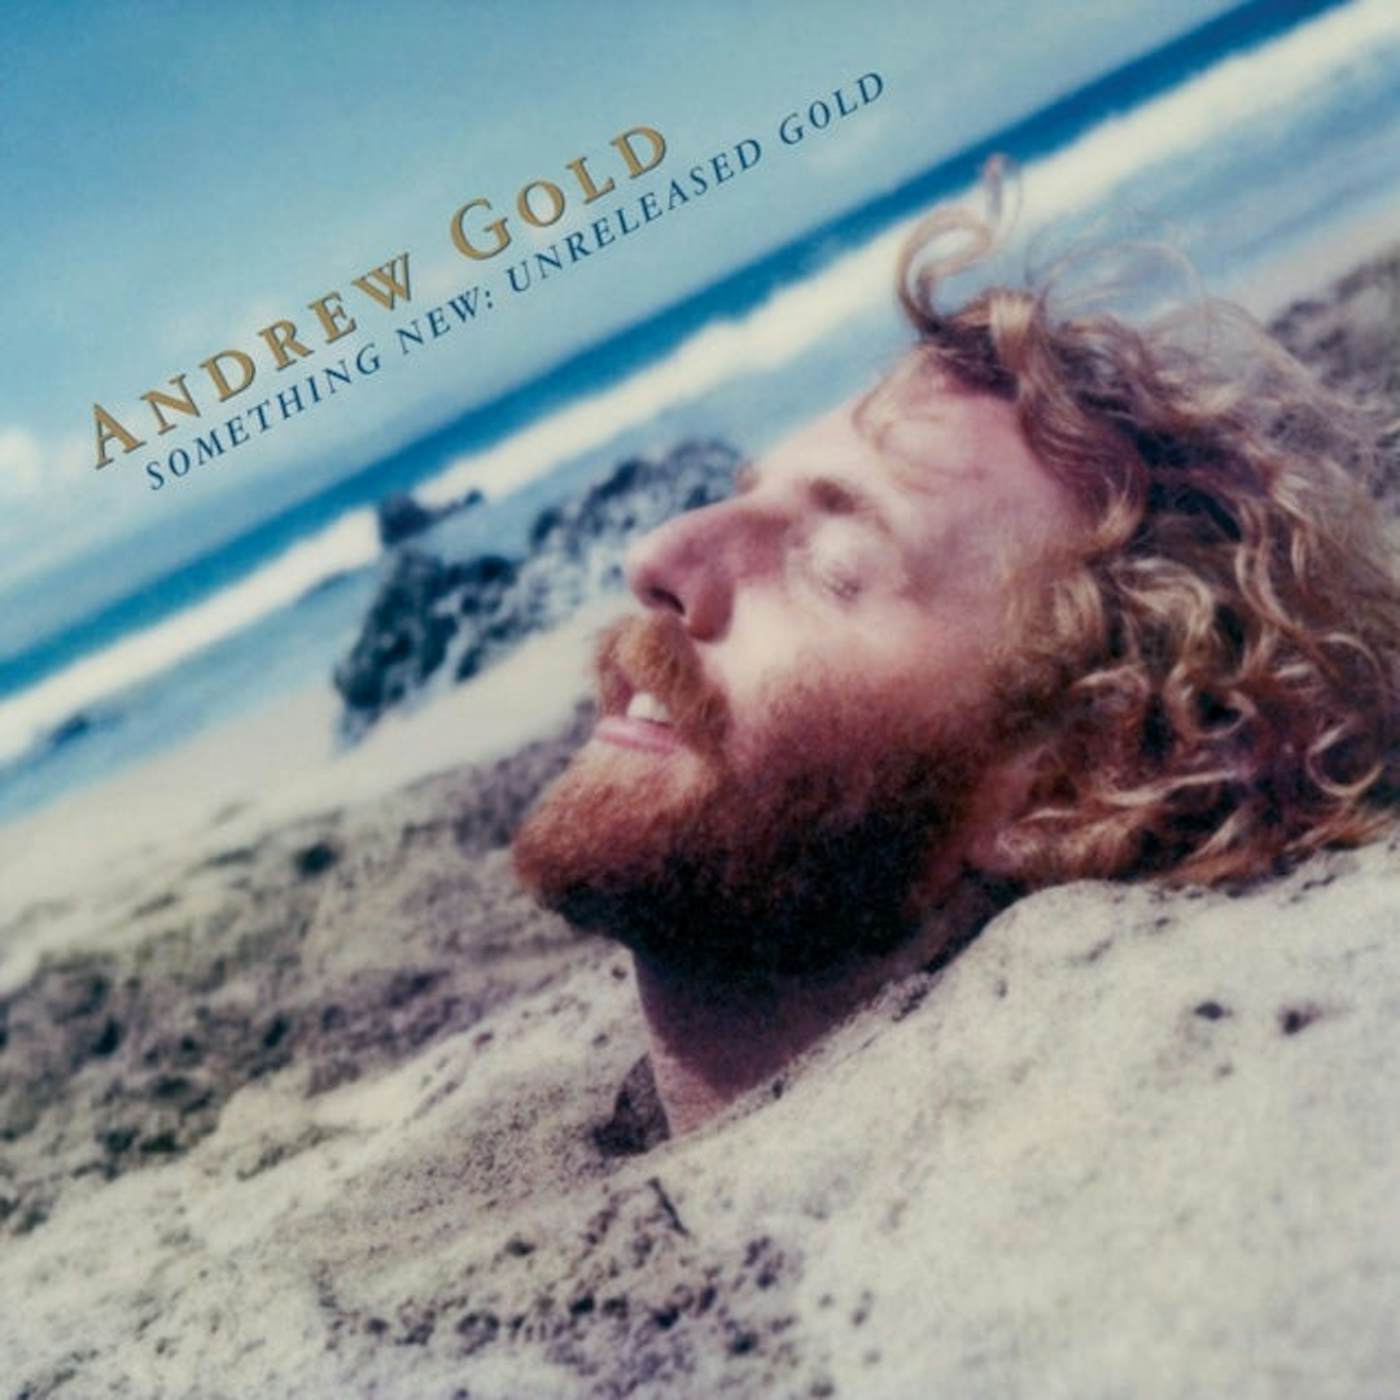 Andrew Gold LP Vinyl Record - Something New: Unreleased Gold